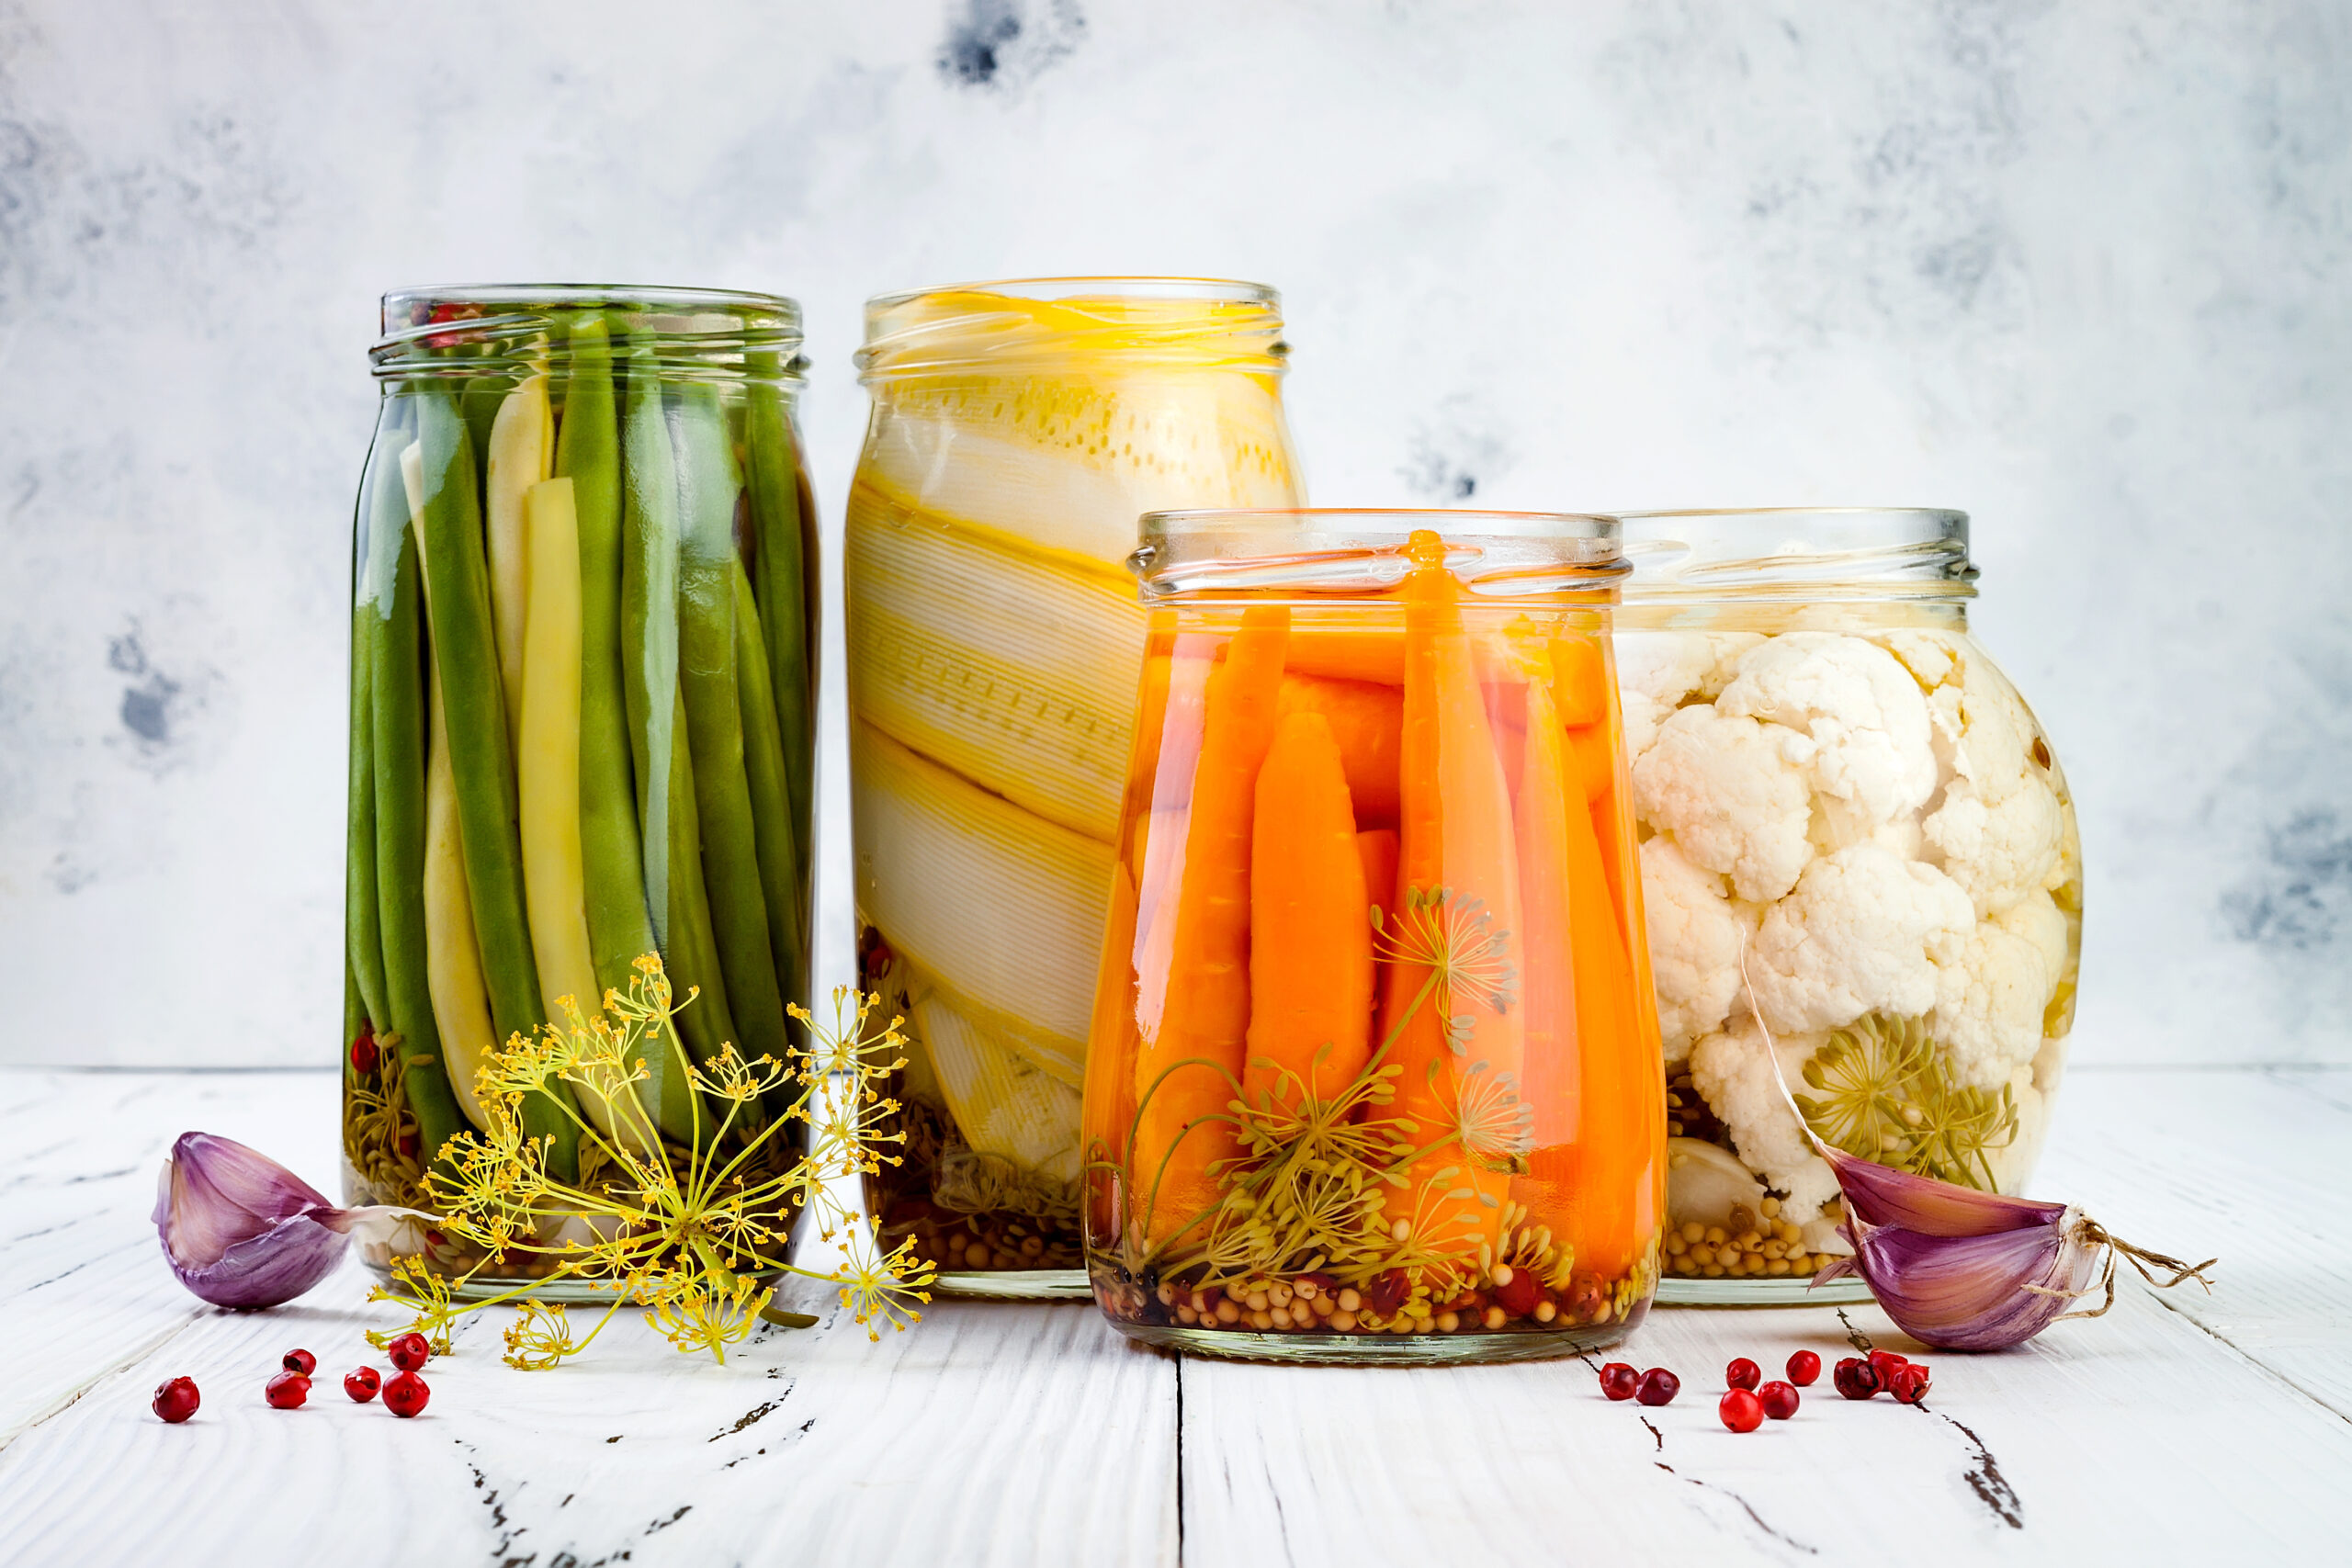 Fermented Foods Can Help To Promote Good Health